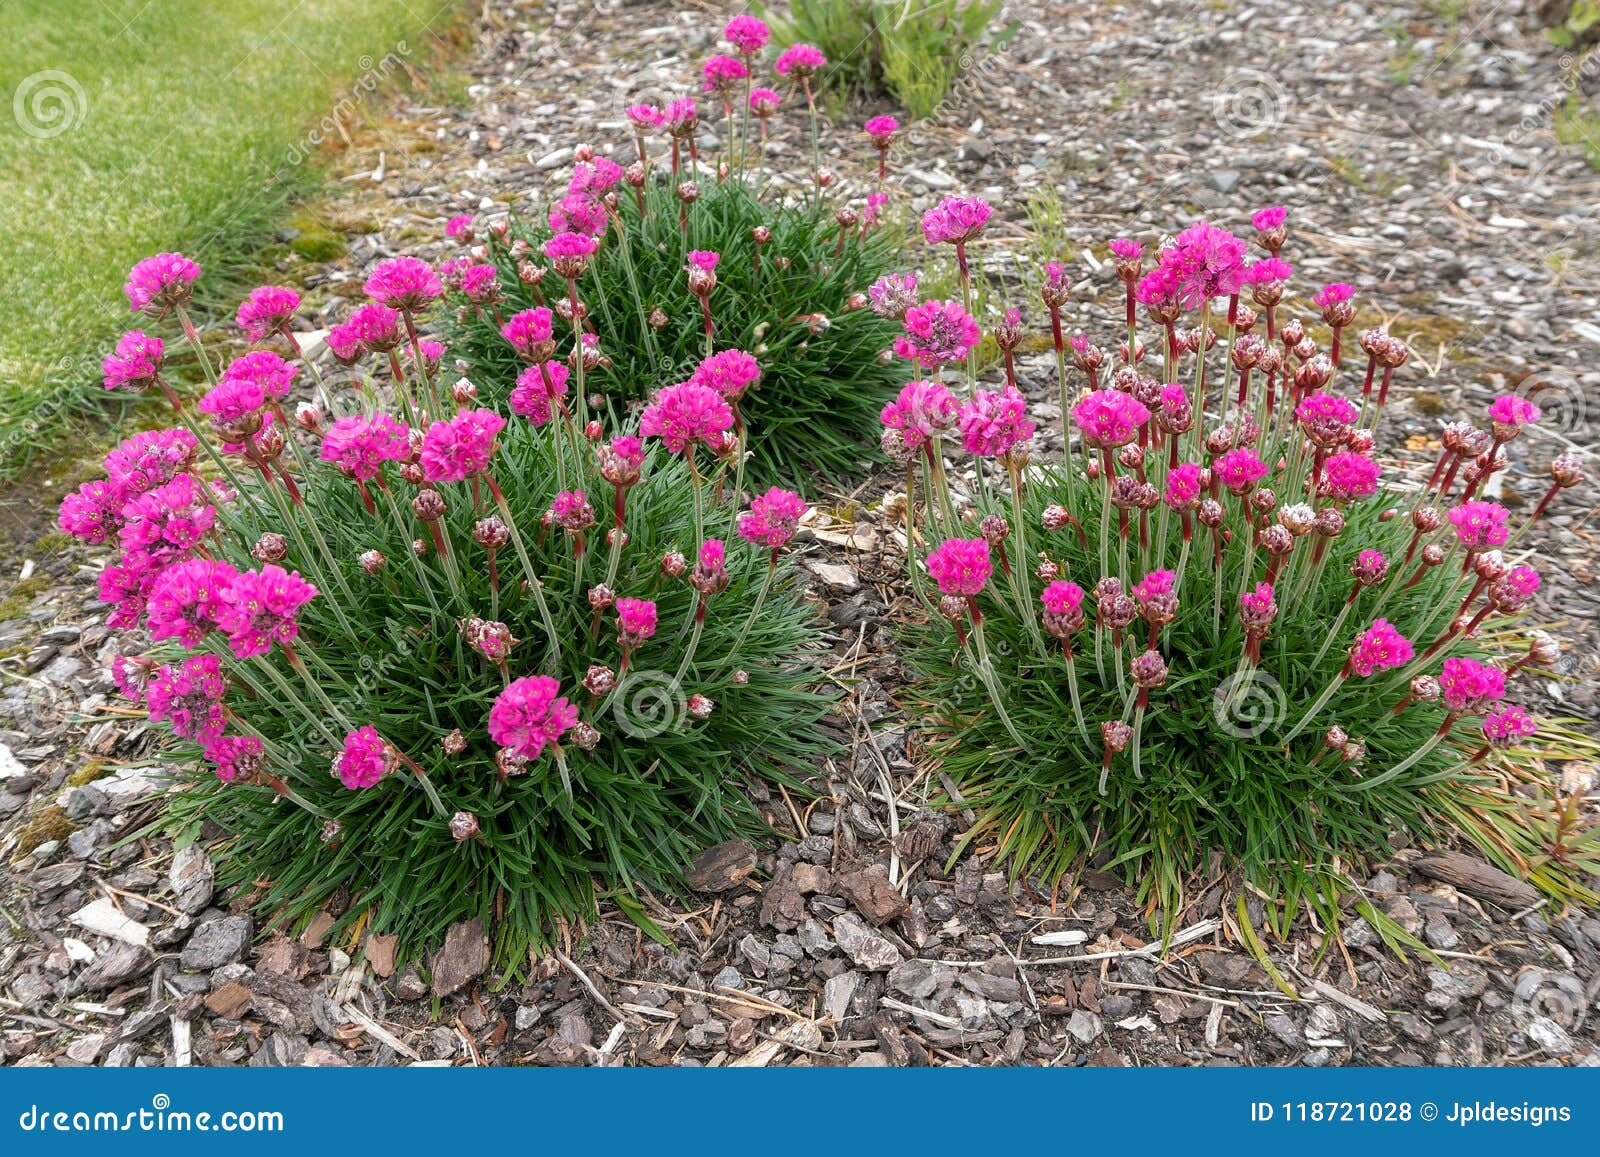 pink sea thrift plant in bloom